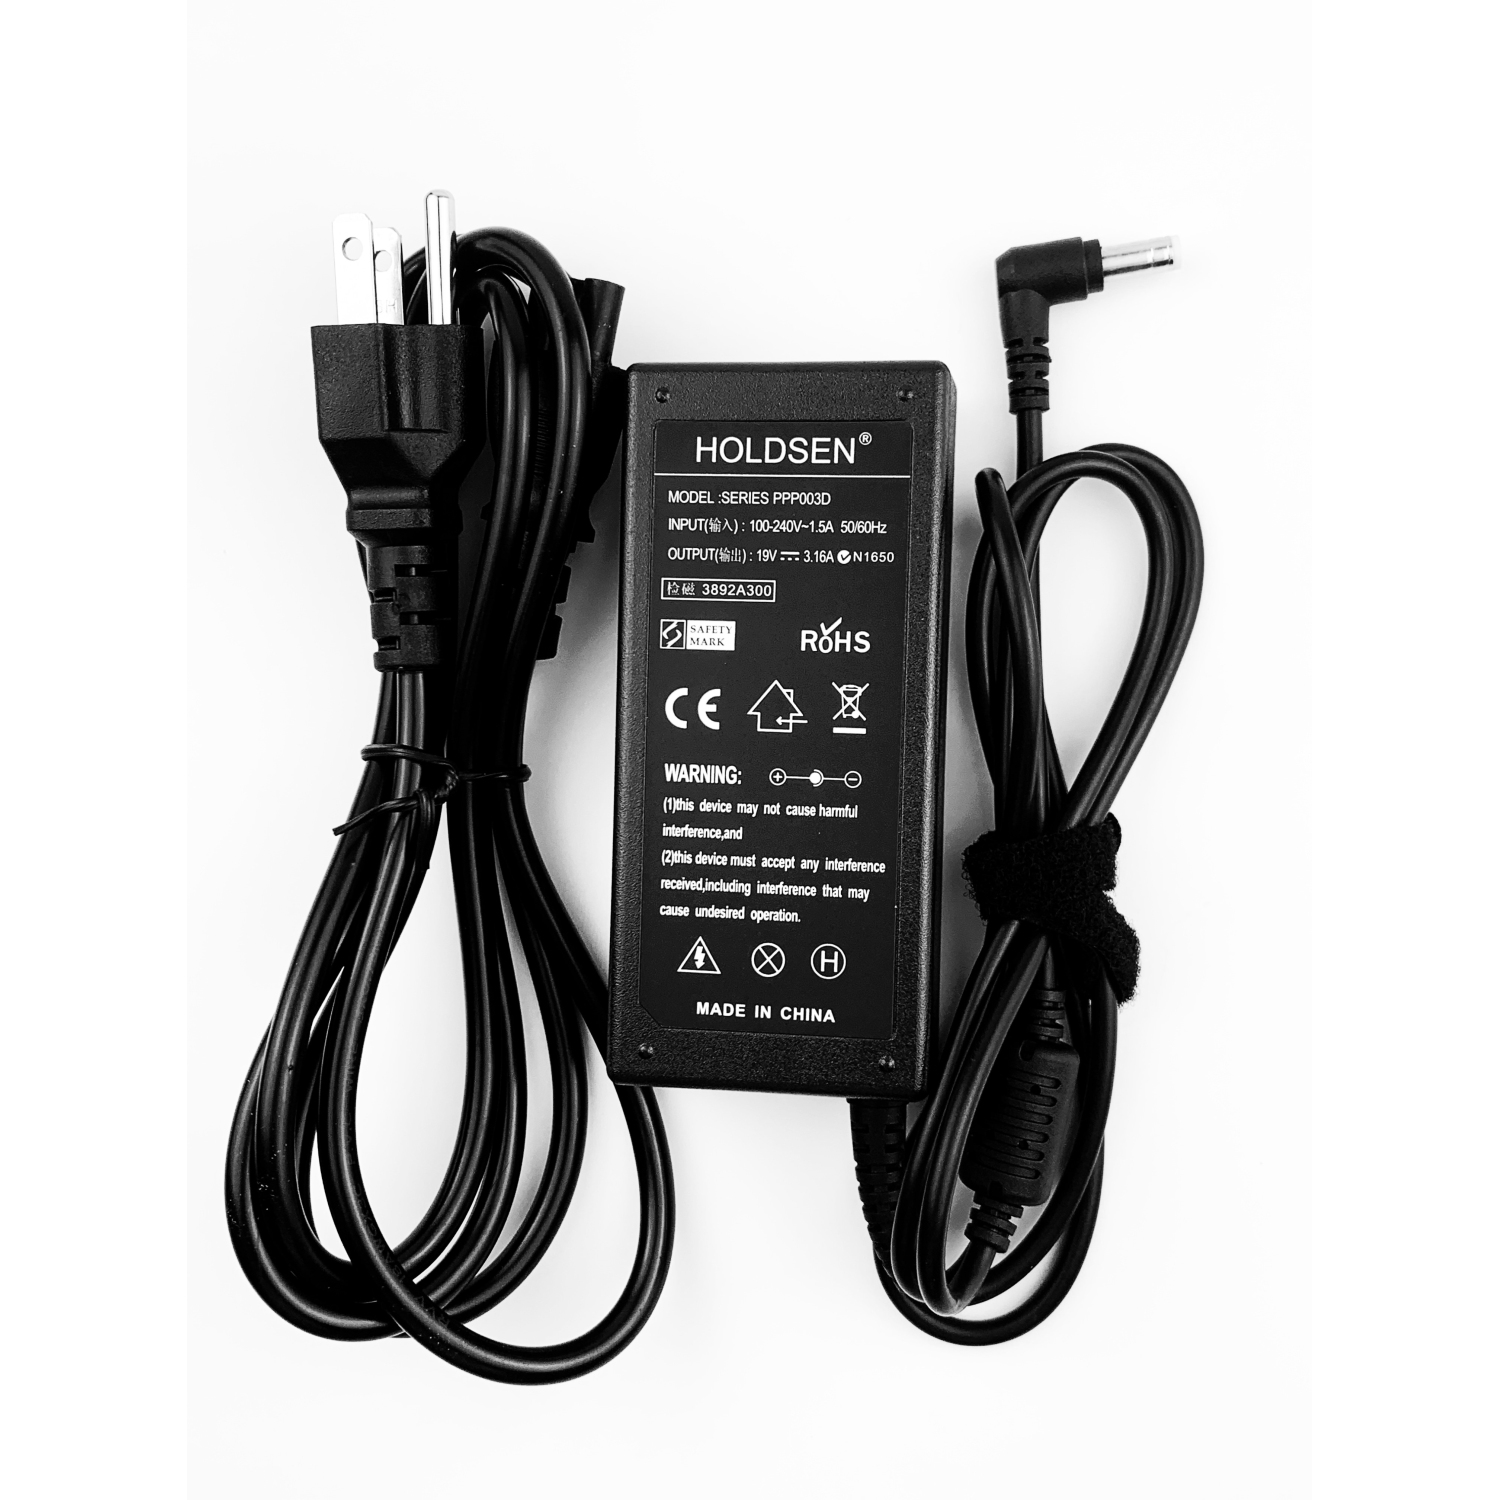 19V 2.37A 3.16A 60W AC adapter power cord for HP Pavilion 23 23es 25es 25xw LCD monitors ONLY